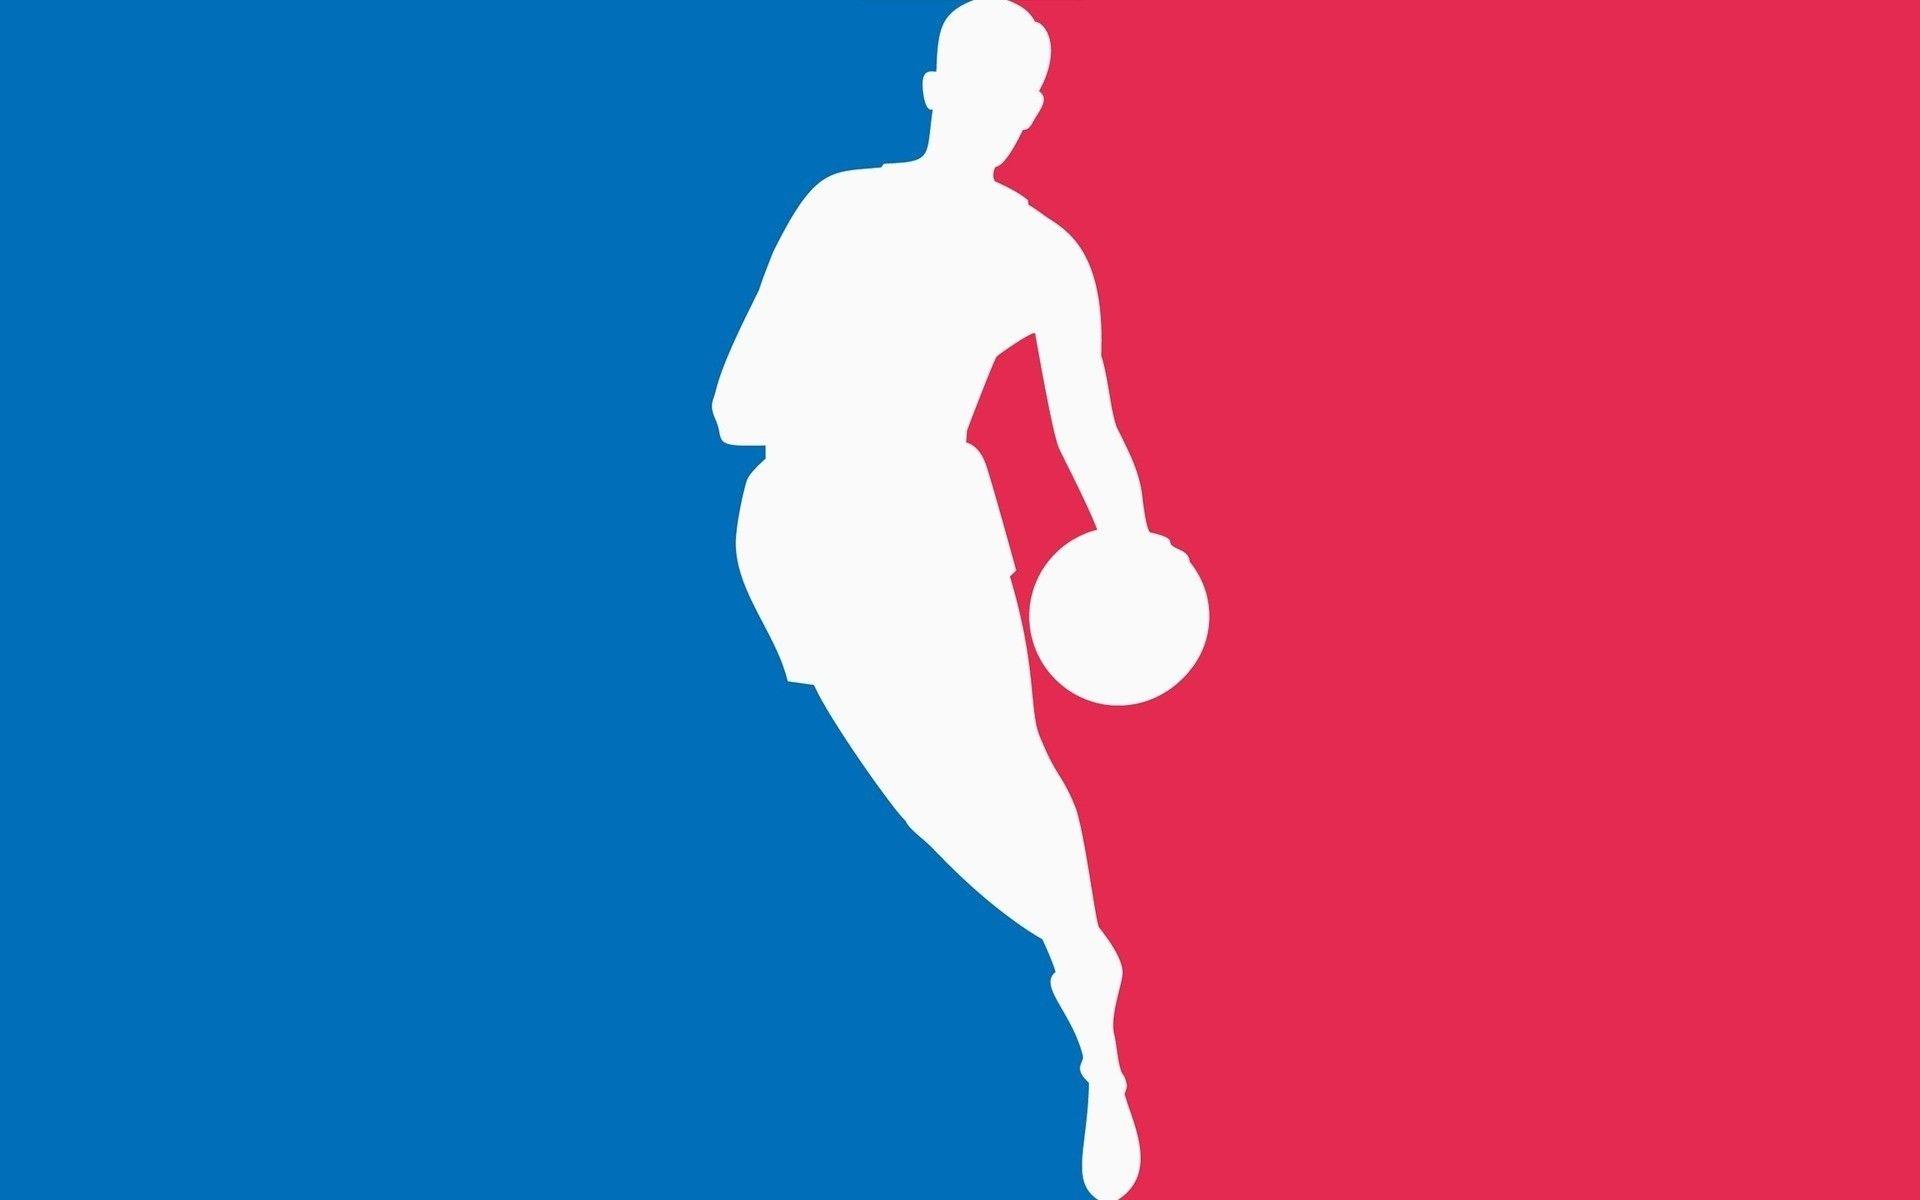 Cool NBA Logo. Android wallpaper for free